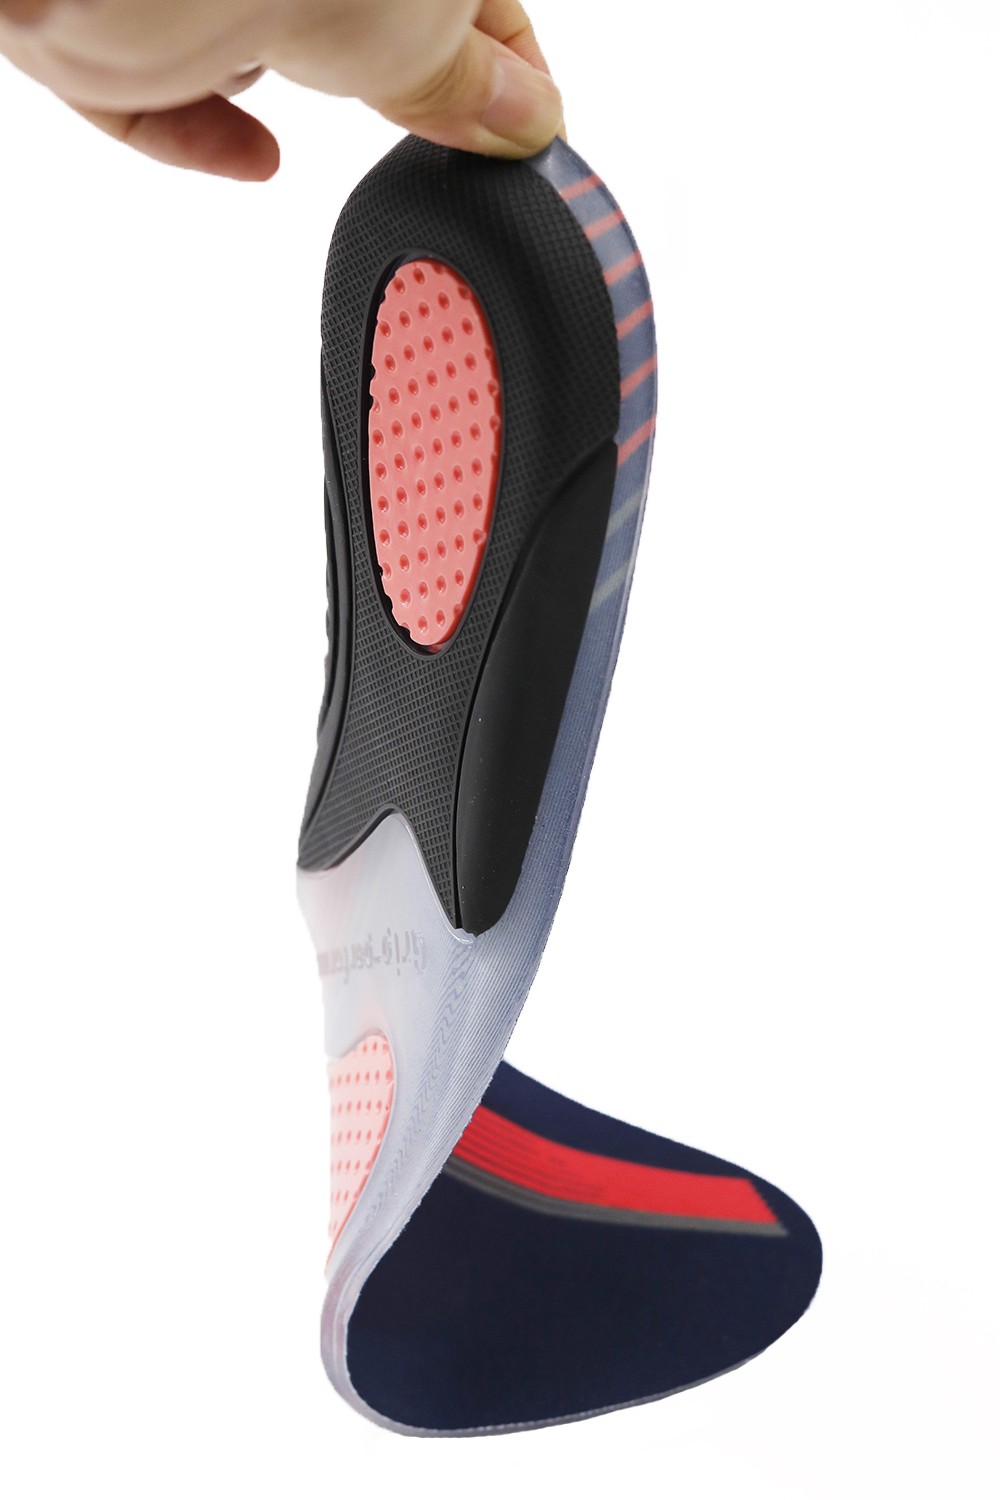 S-King gel insoles factory for forefoot pad-5